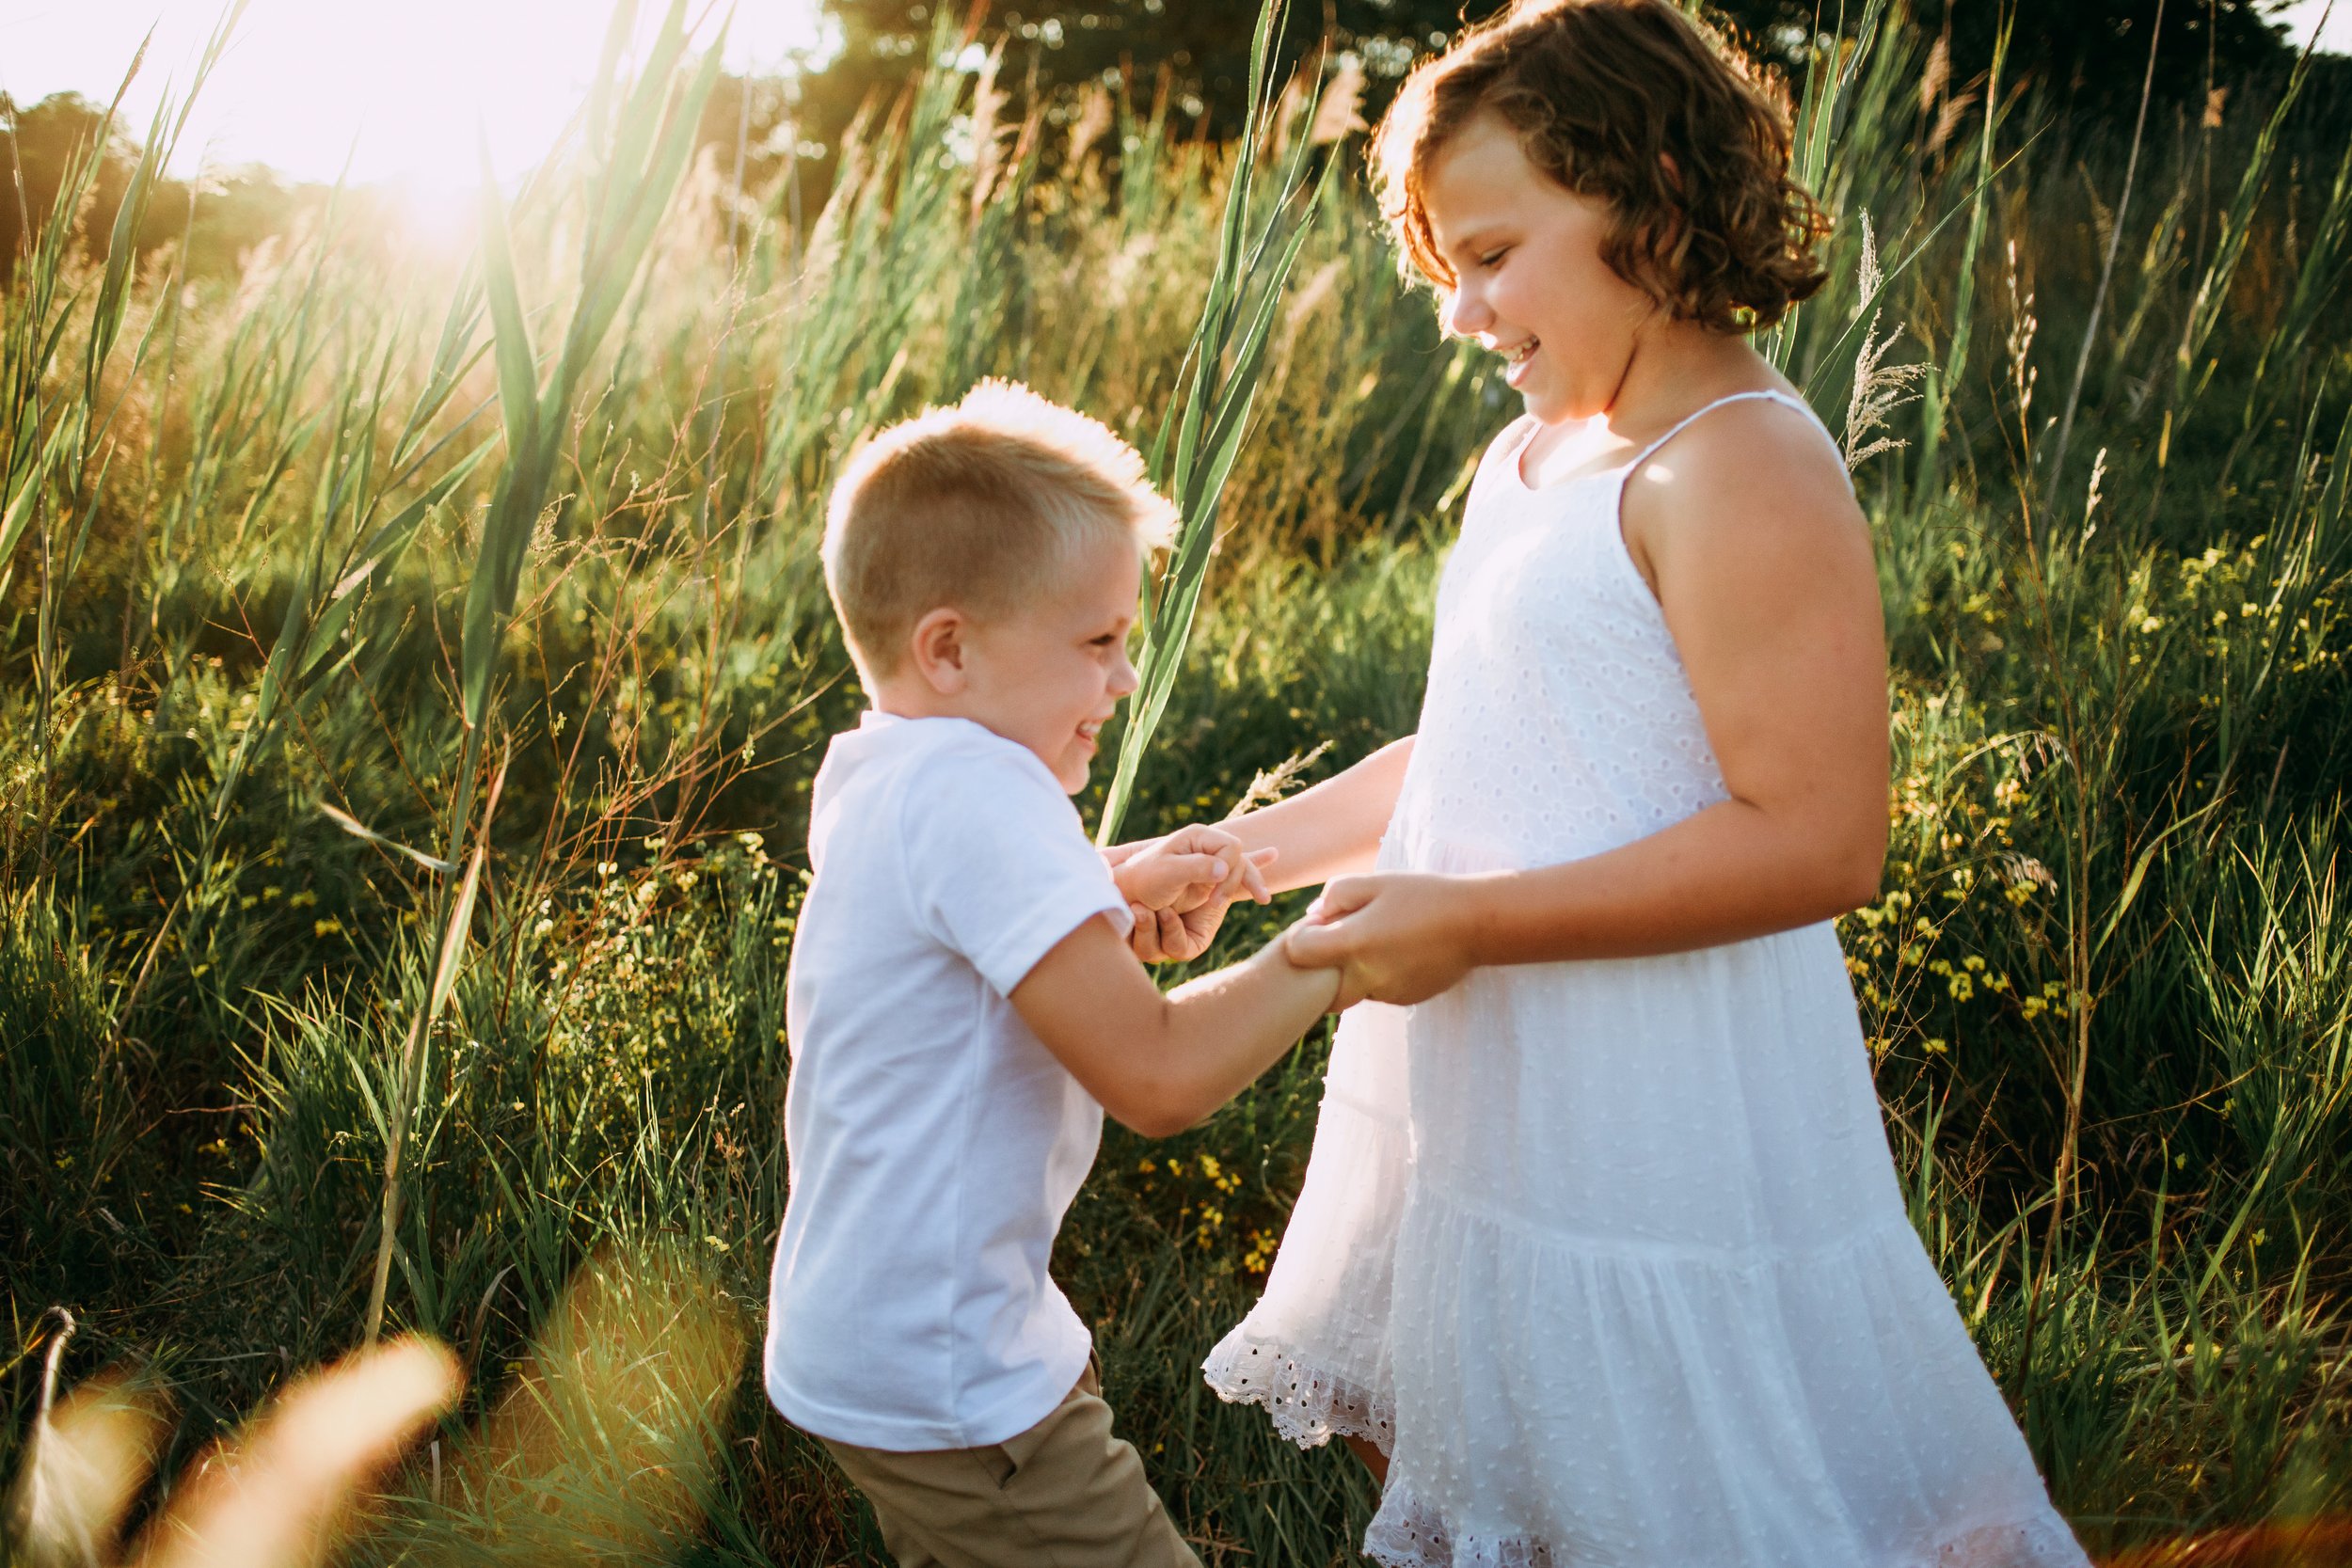  A brother and sister wearing white spin around in a grass field at sunset by Teala Ward Photography. sibling moment captured #motherhood #mommapics #TealaWardPhotography #TealaWardFamilies #IllinoisPhotographers #IllinoisFamilyPhotography 